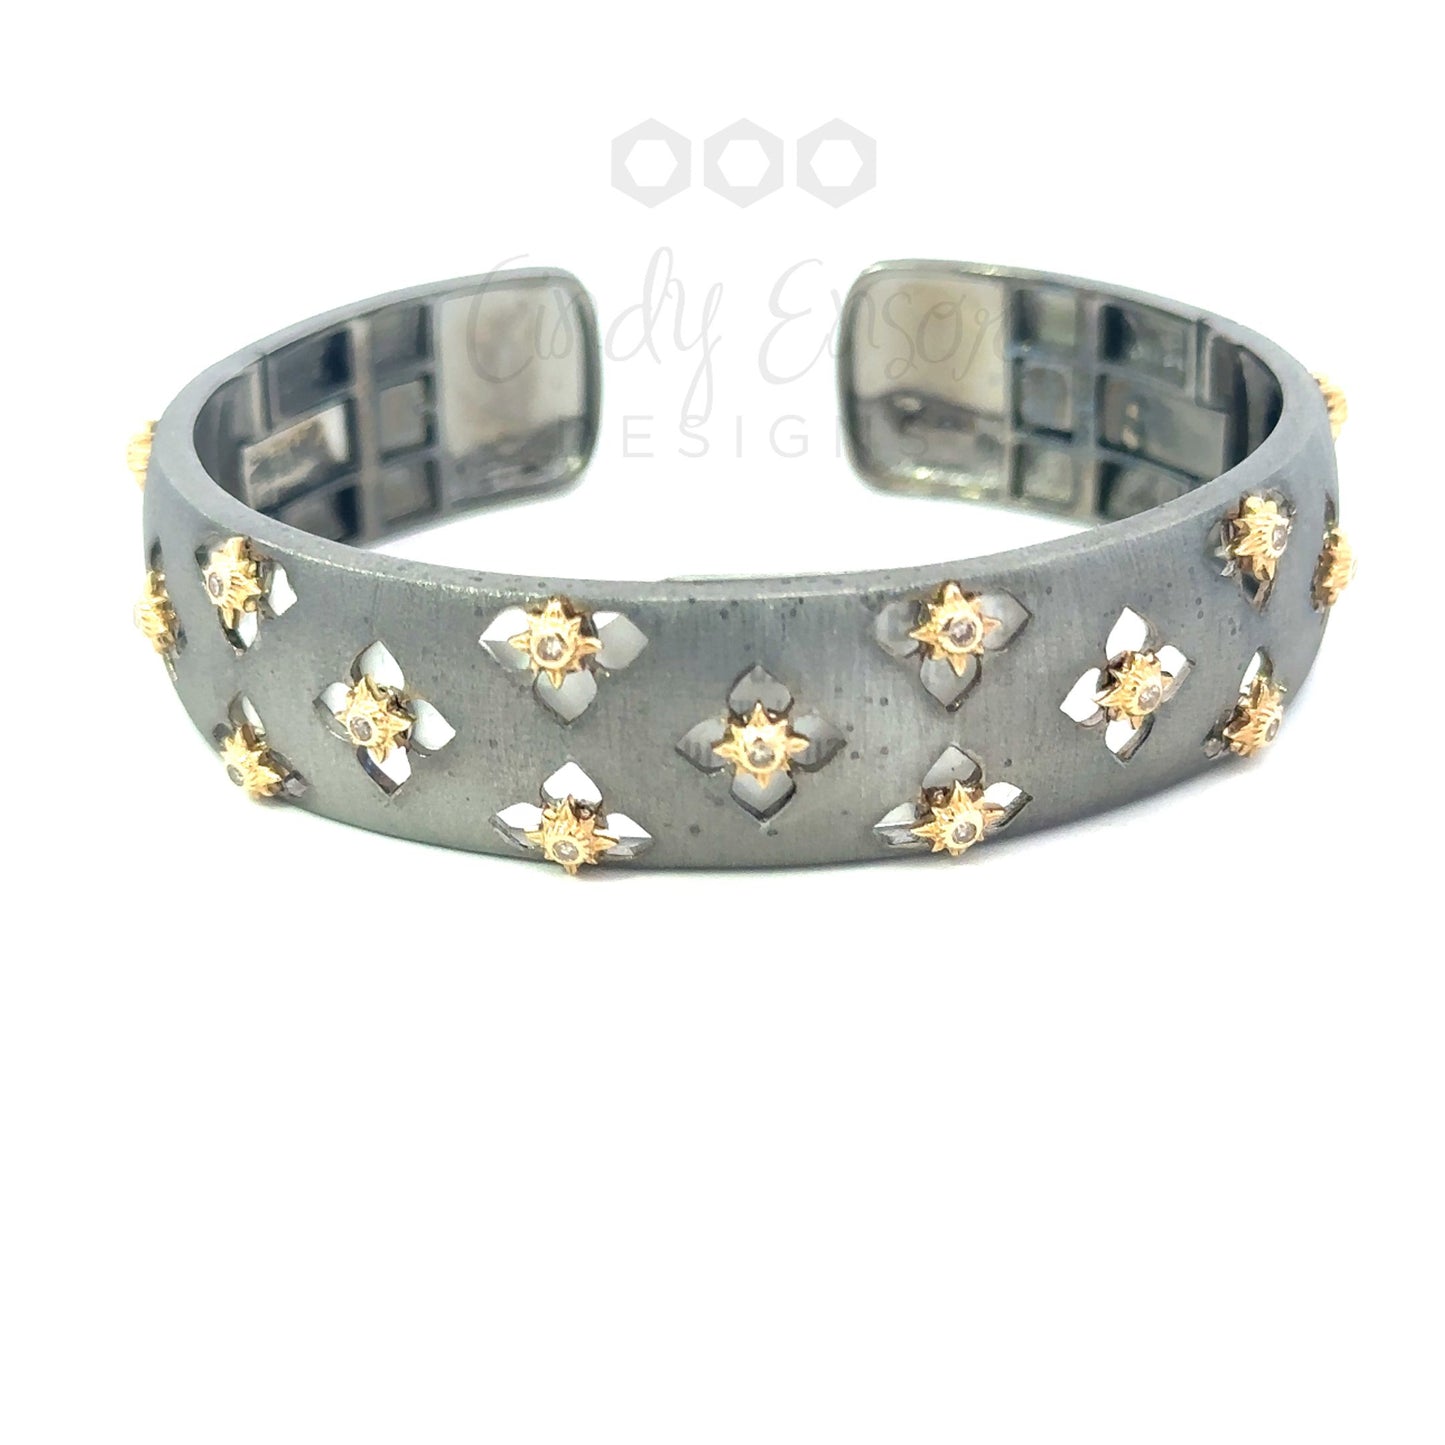 Brushed Metal Two Tone Diamond Bracelet with Yellow Gold Clover Accents